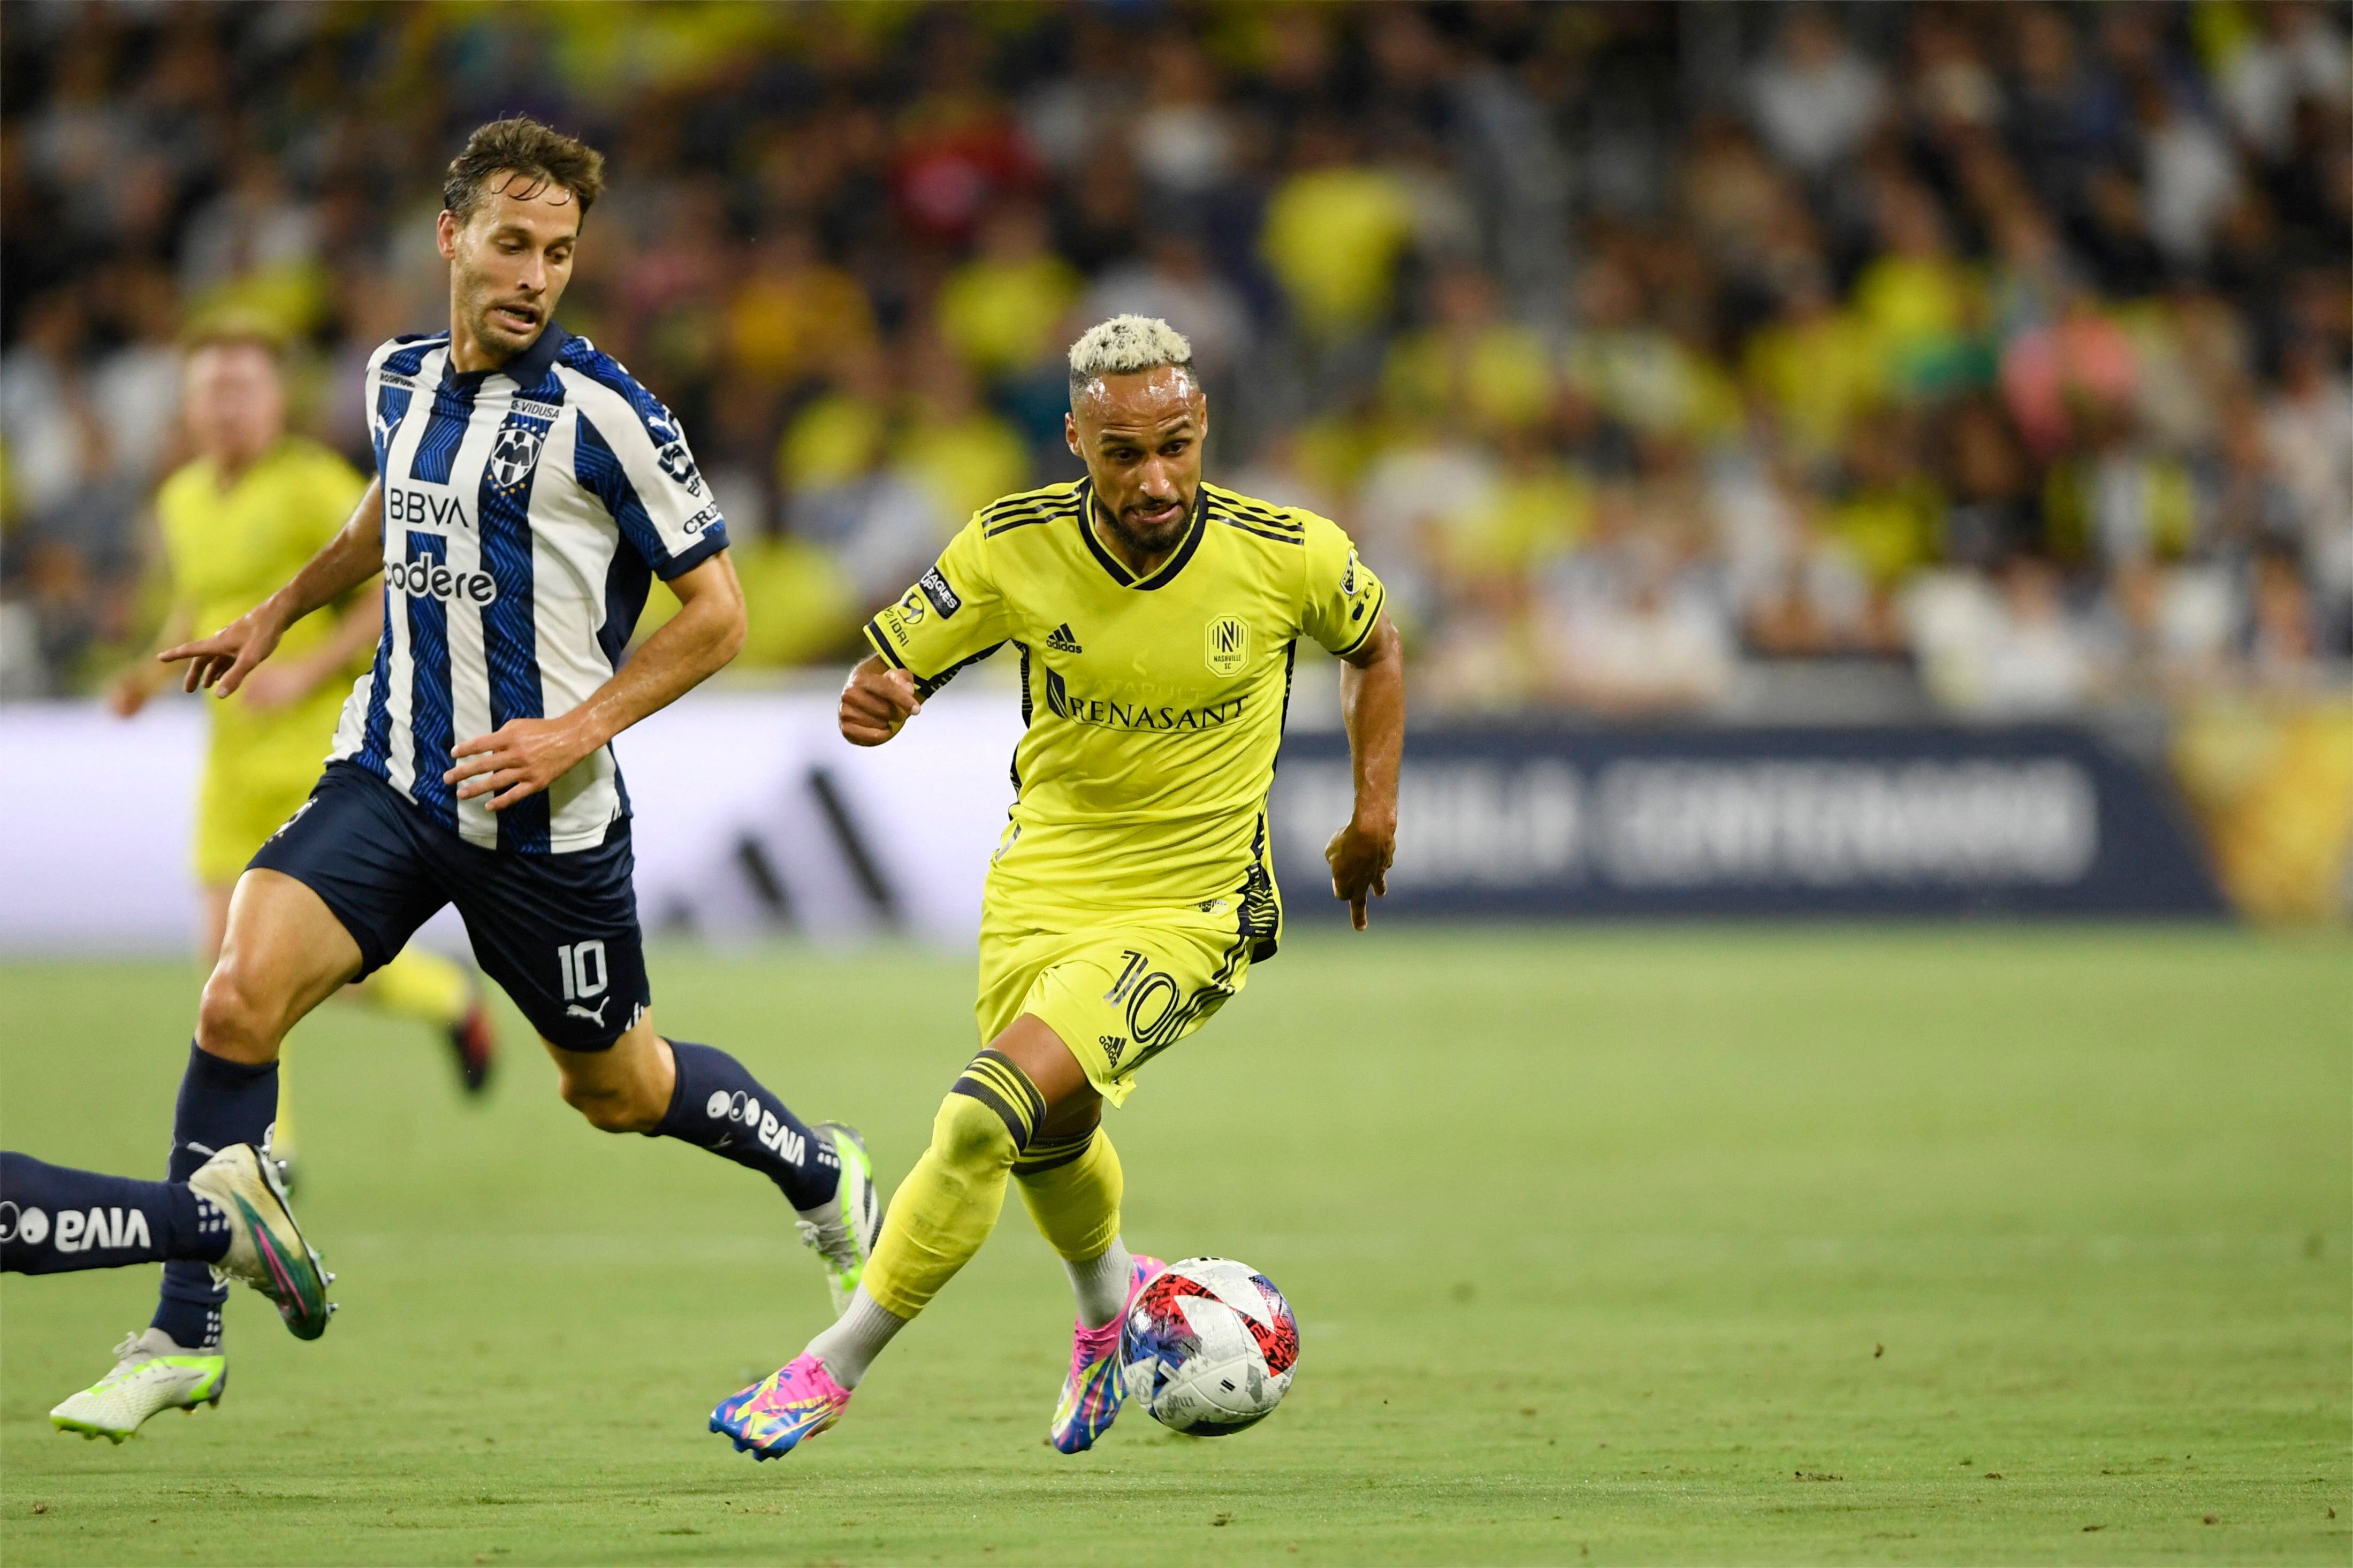 Aug 15, 2023; Nashville, TN, USA; Nashville SC midfielder Hany Mukhtar (10) plays the ball defended by CF Monterrey midfielder Sergio Canales (10) in the first half at GEODIS Park. Mandatory Credit: Steve Roberts-USA TODAY Sports